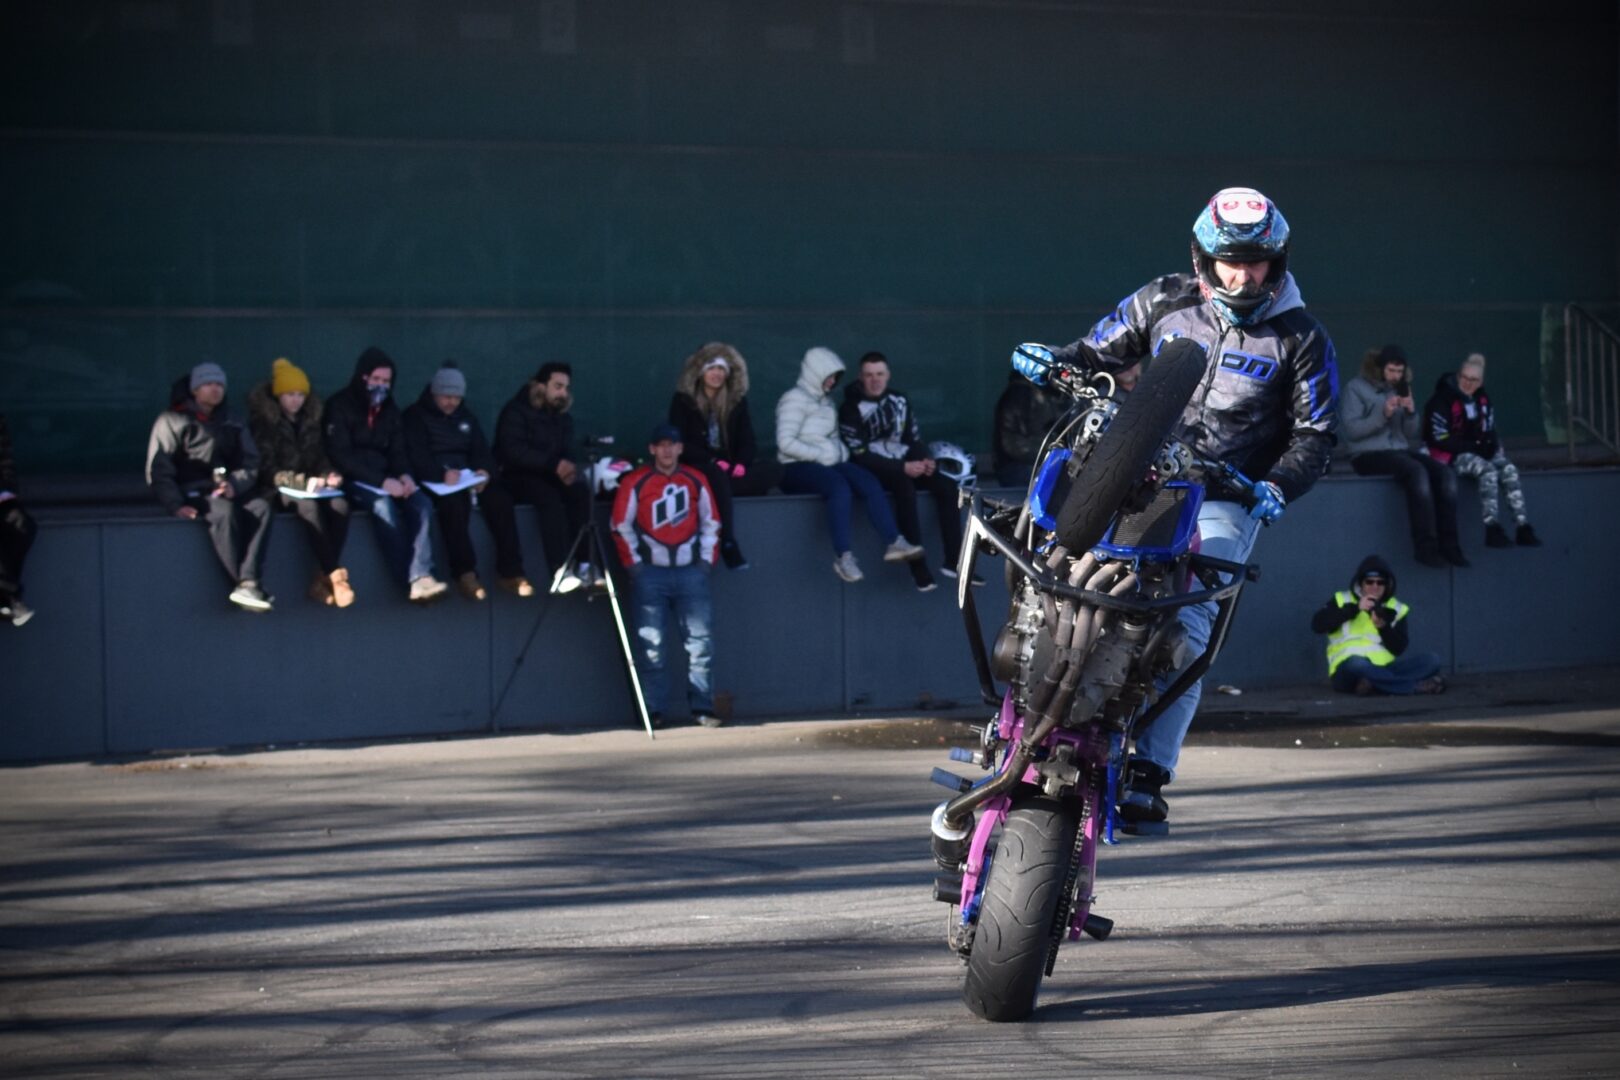 The freestyle stunt riding competition wowed the crowds